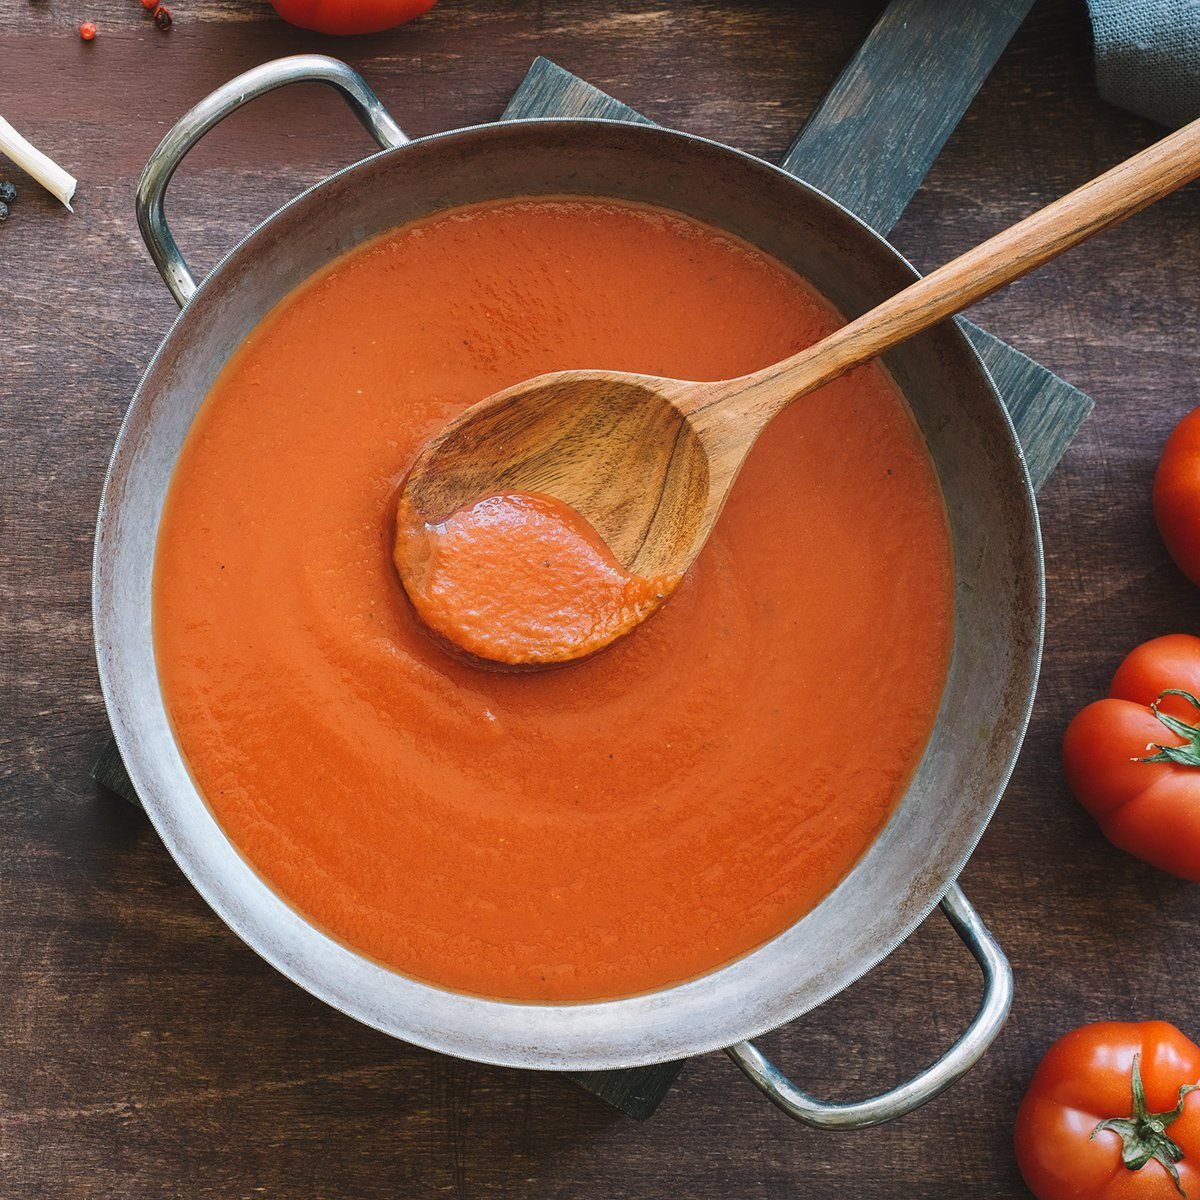 Tomato sauce in pan. Top view wooden brown background; Shutterstock ID 1380828656; Job (TFH, TOH, RD, BNB, CWM, CM): TOH